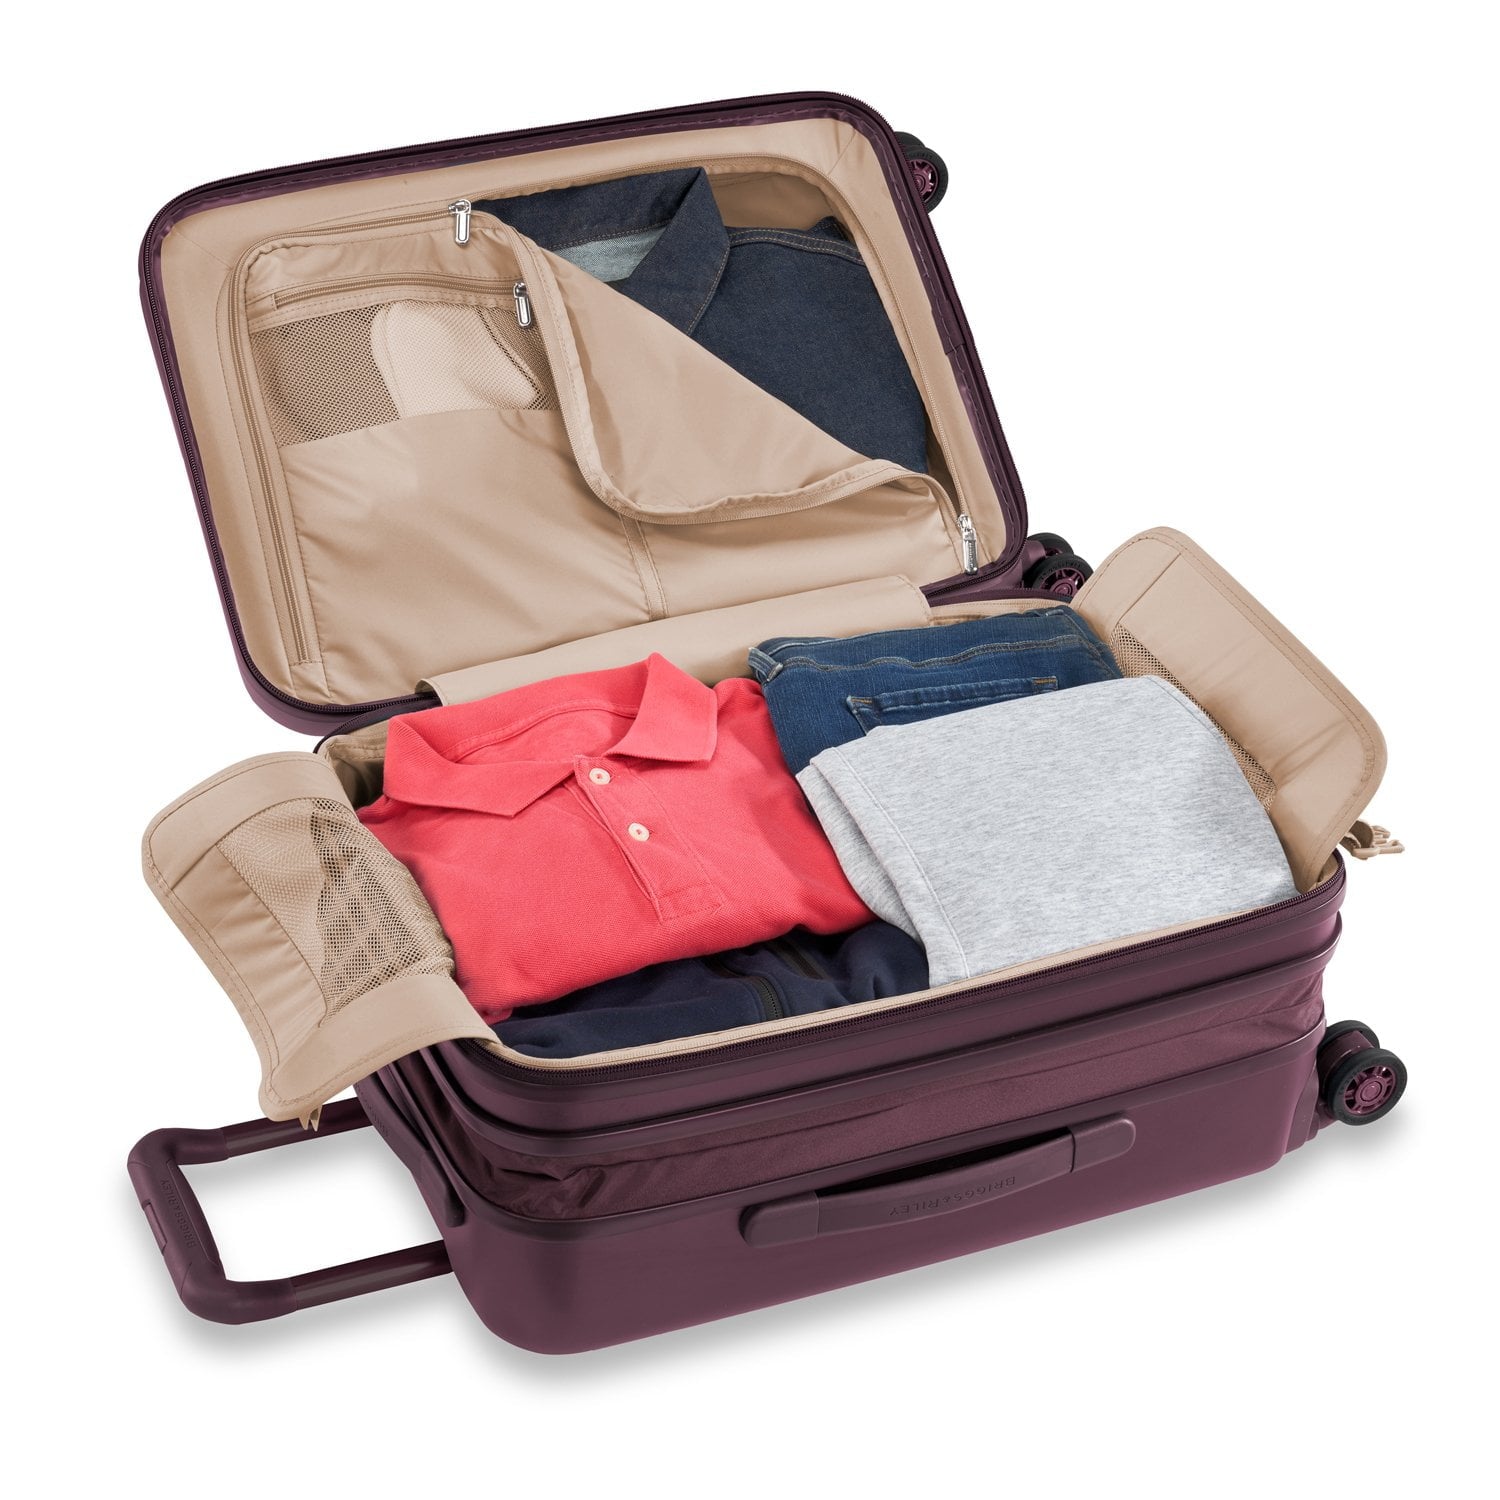 Briggs & Riley Sympatico Domestic Carry-On Expandable Spinner Luggage